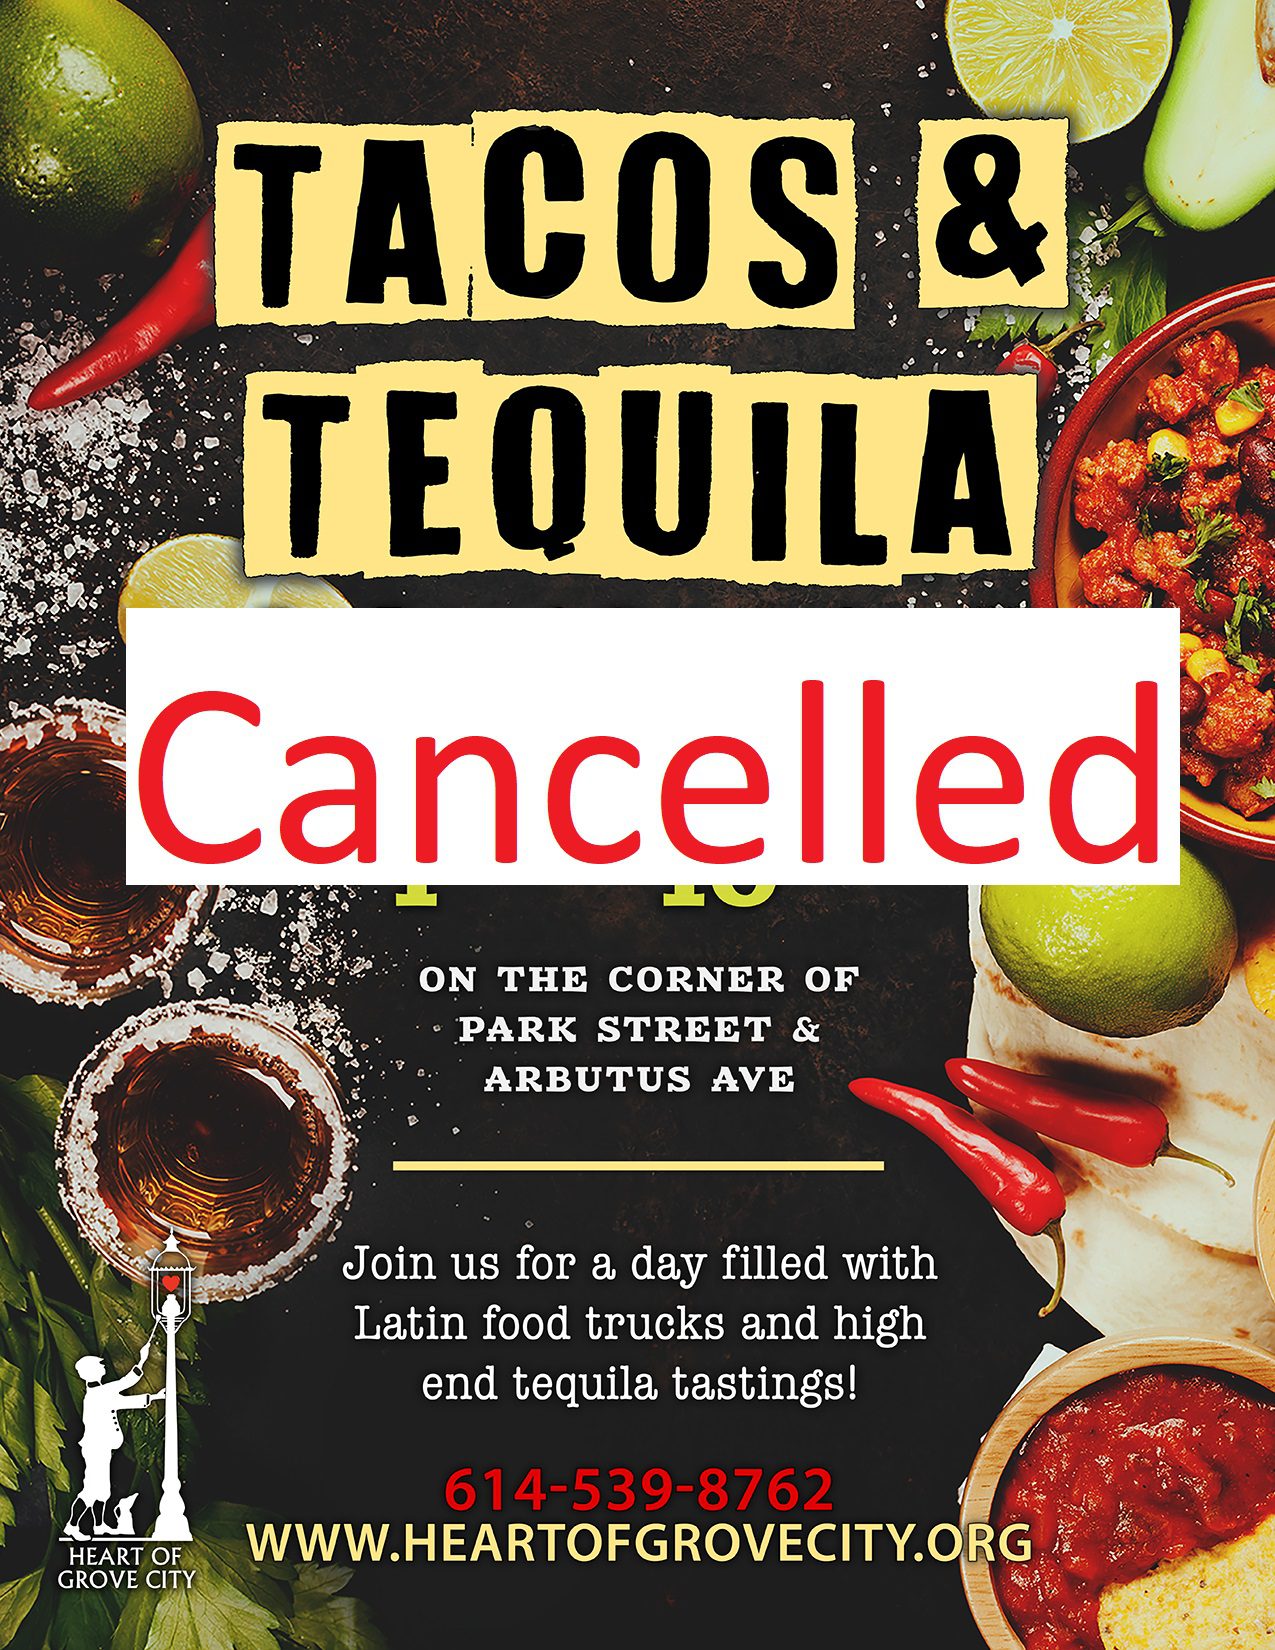 Tacos and Tequila Cancelled